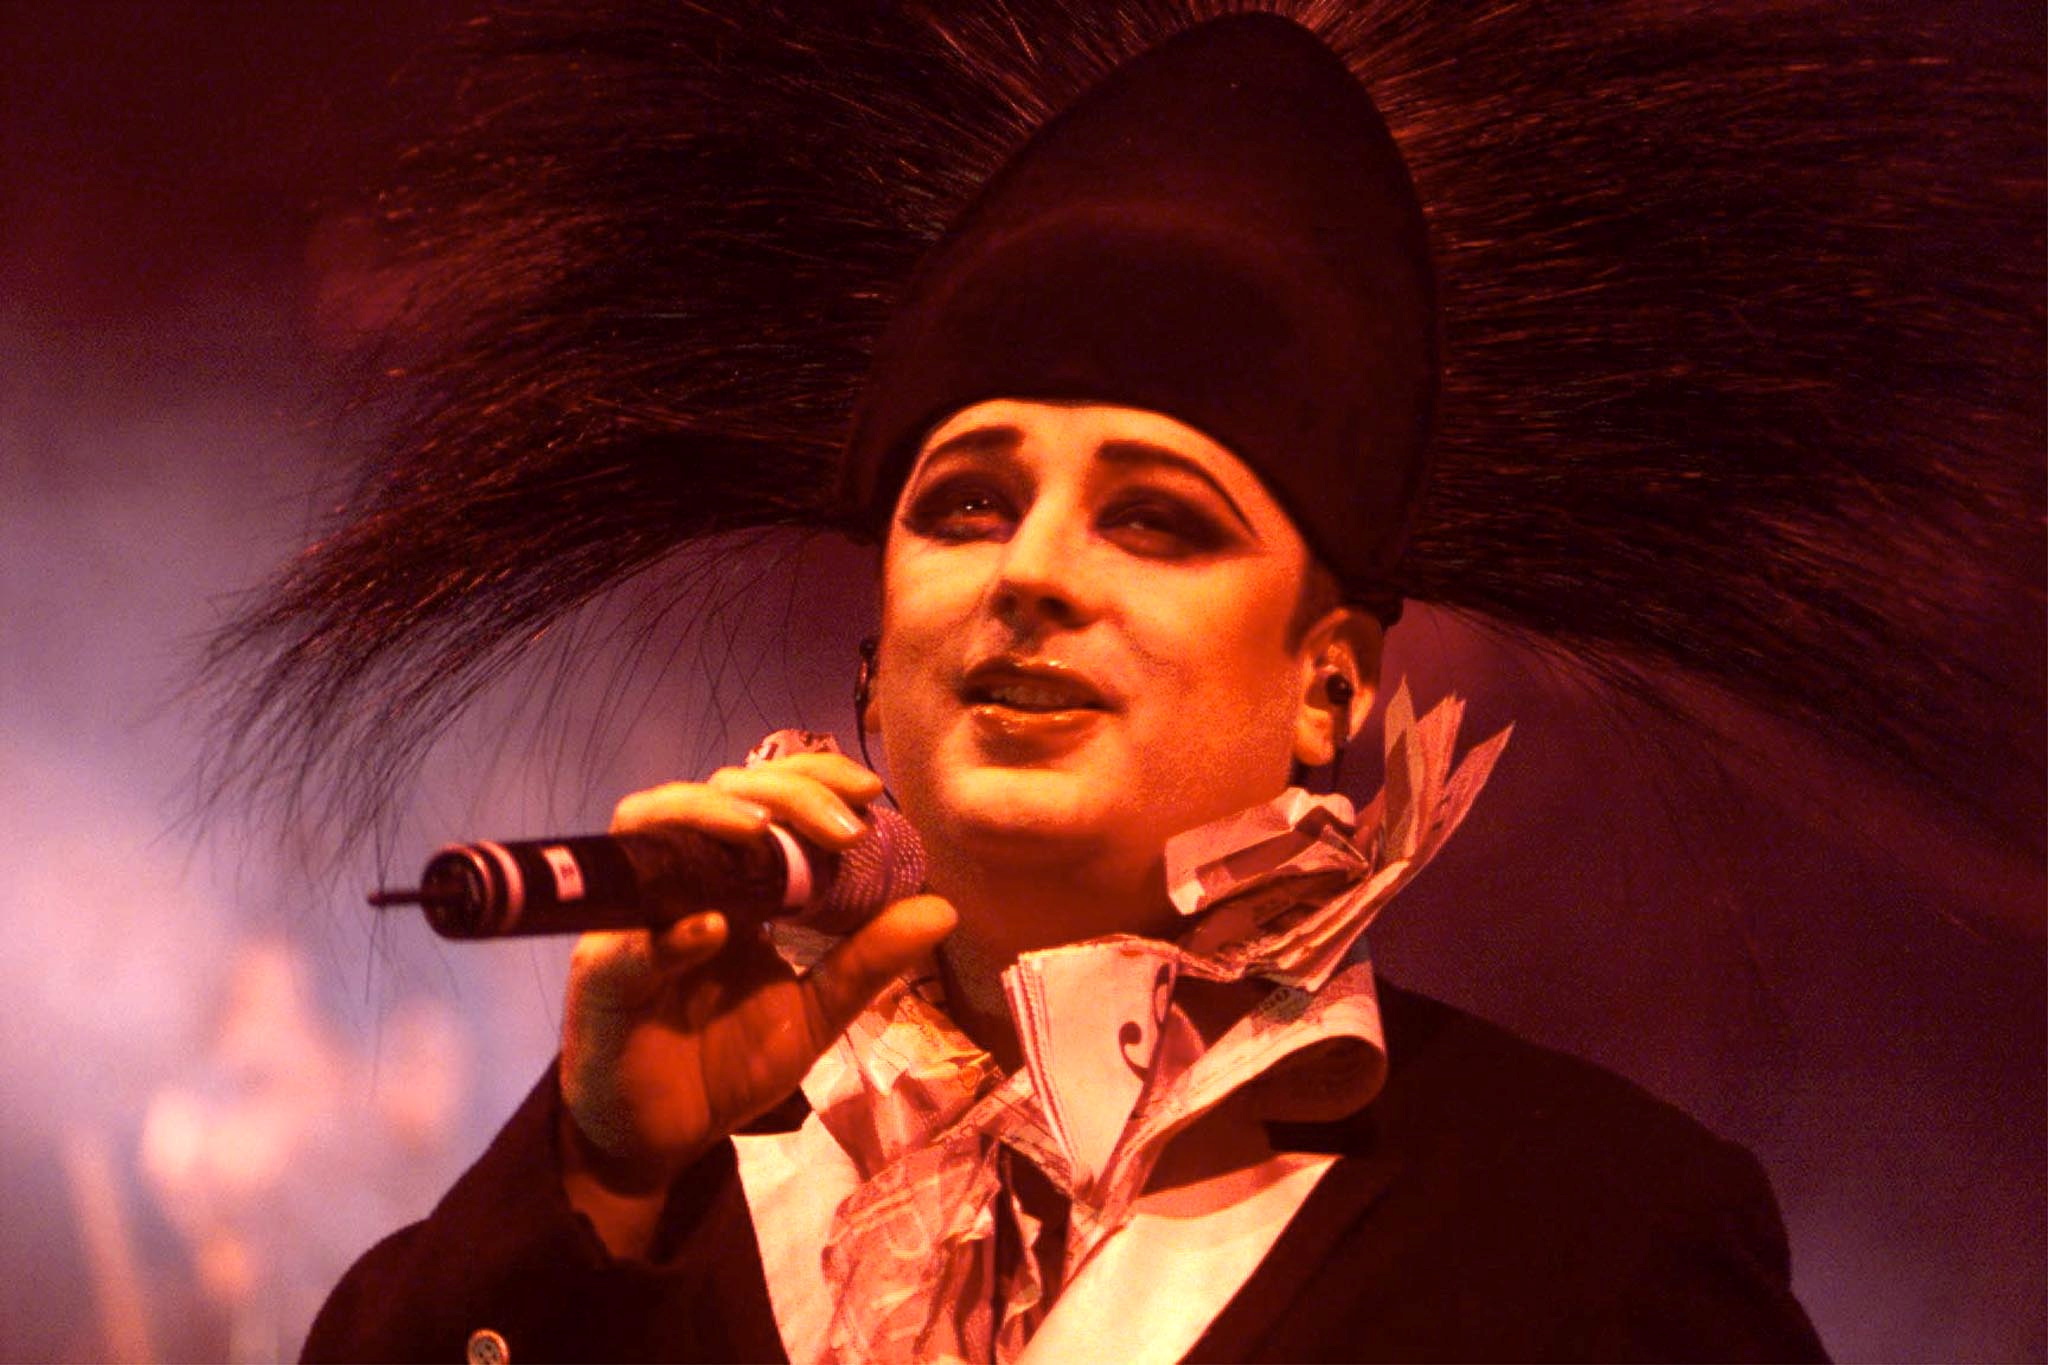 BOY GEORGE PERFORMS IN SINGAPORE.